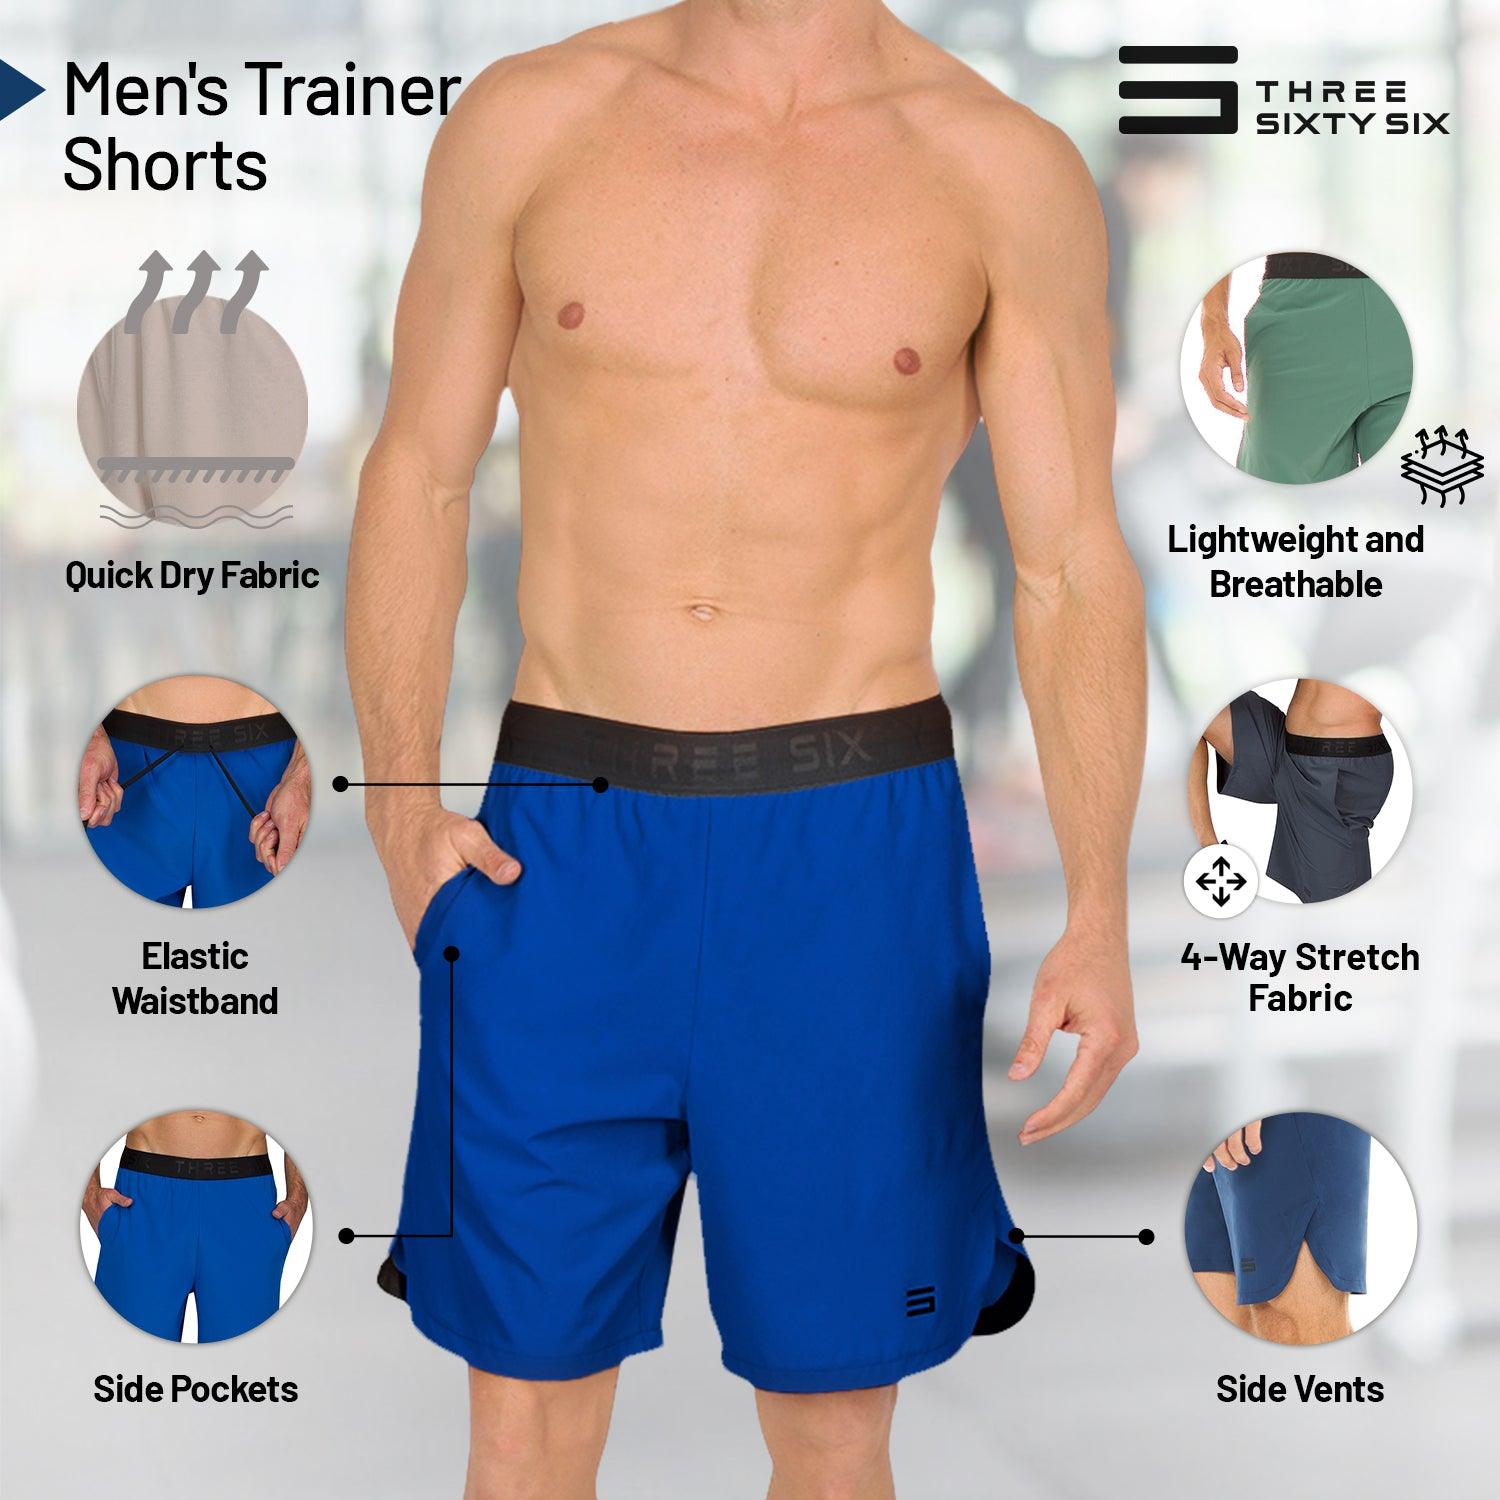 Dry-Fit Men's Workout Shorts - 8” Inseam